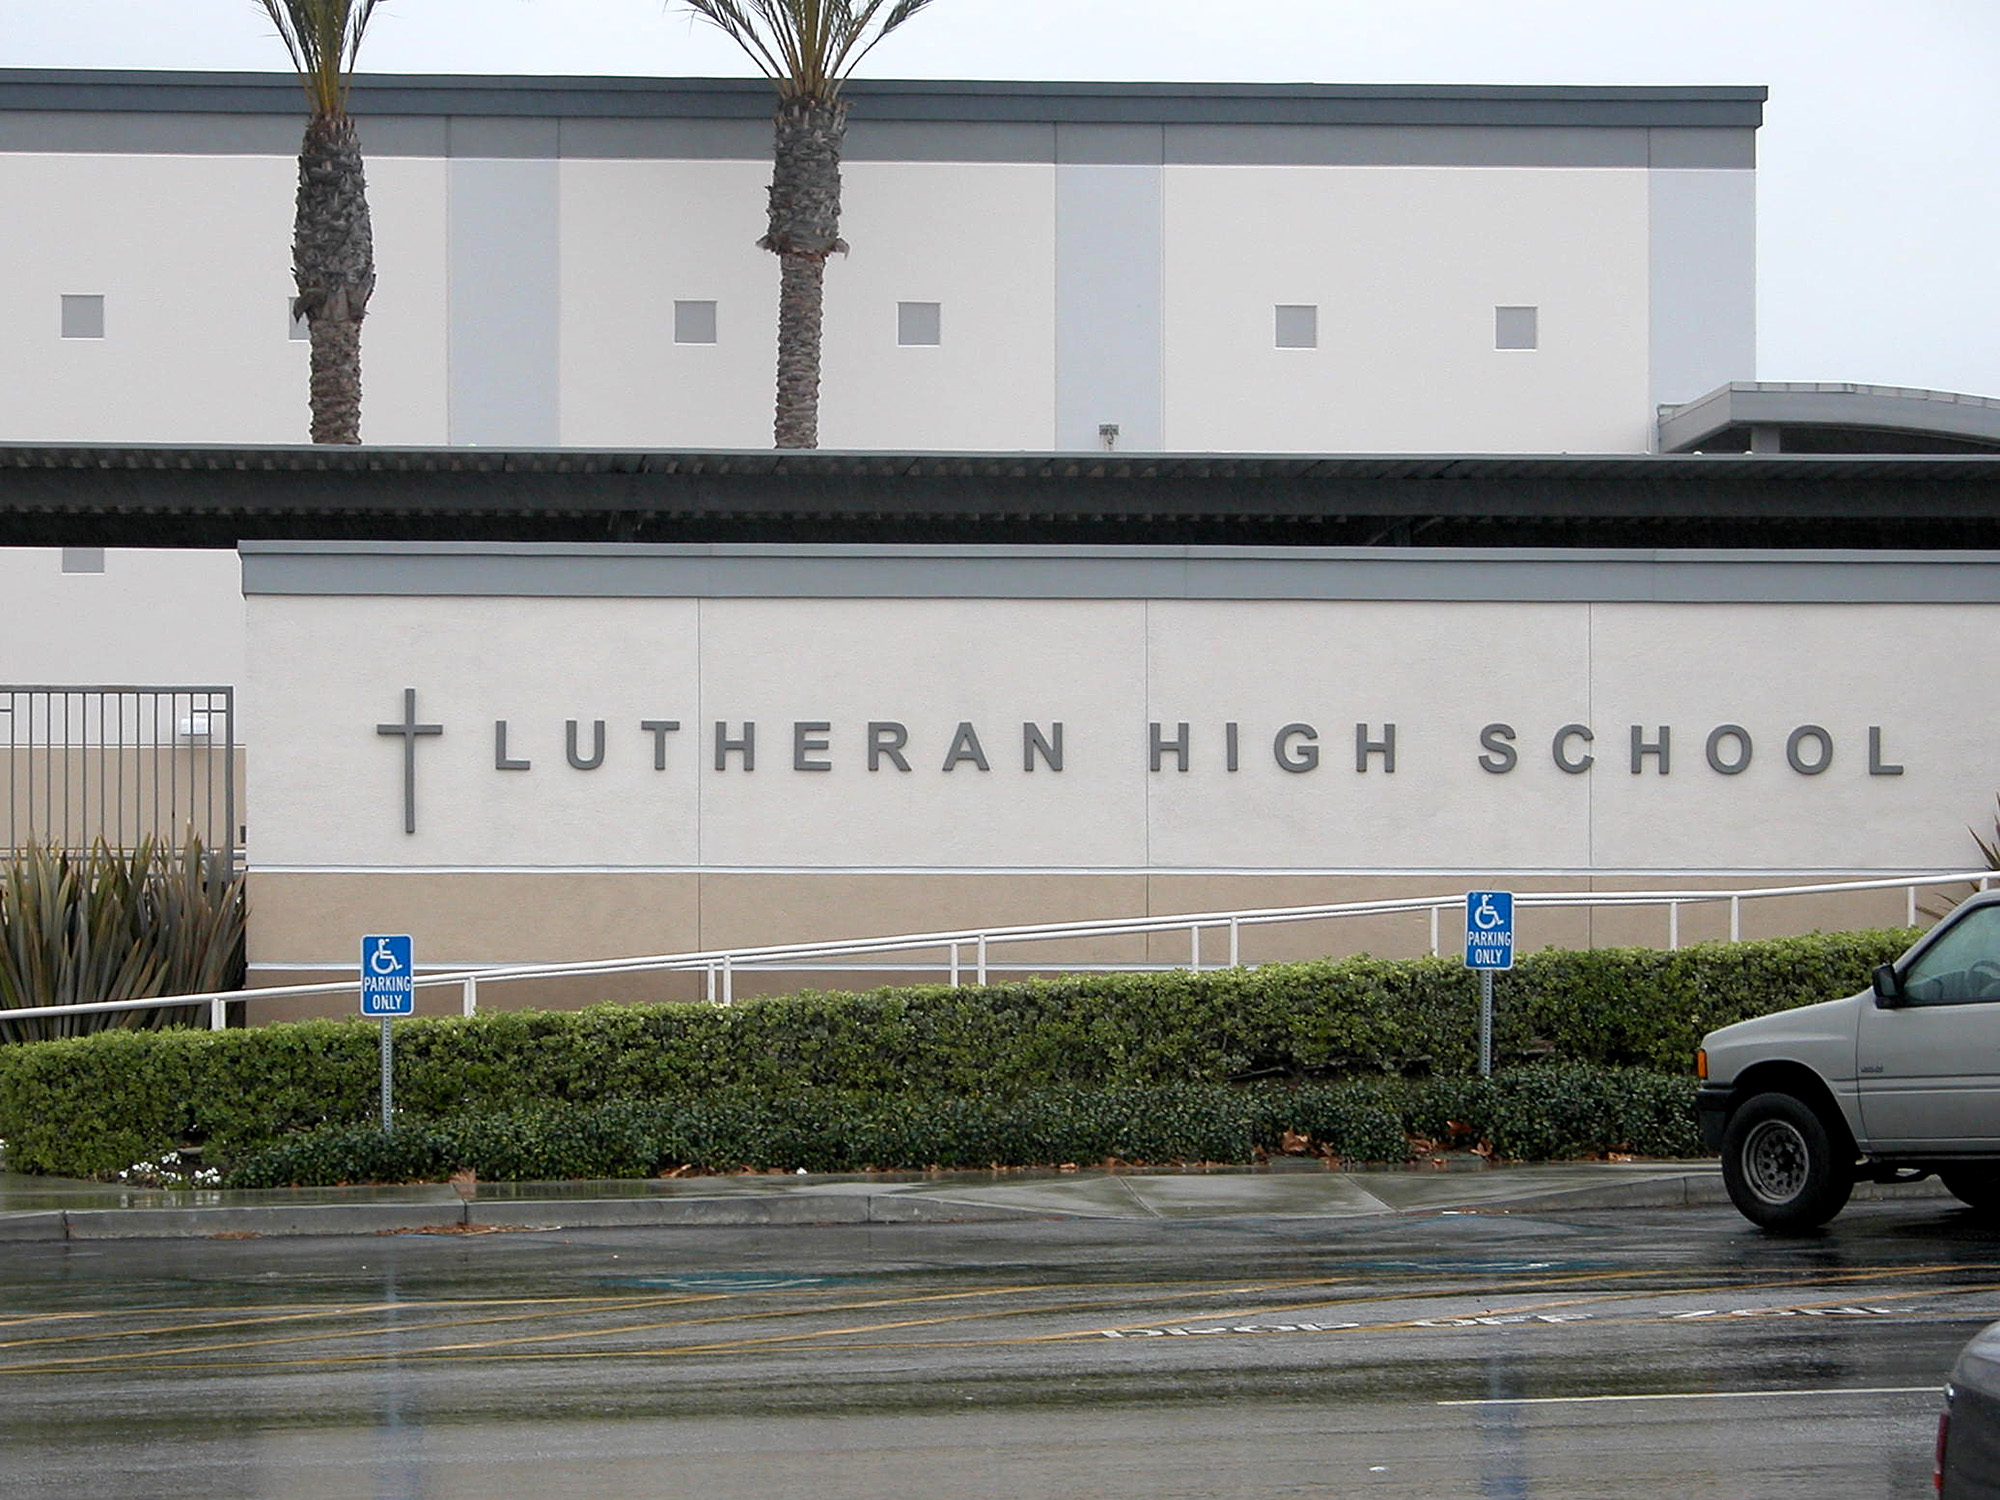 Lutheran High School-injection molded plastic-Minnesota letters